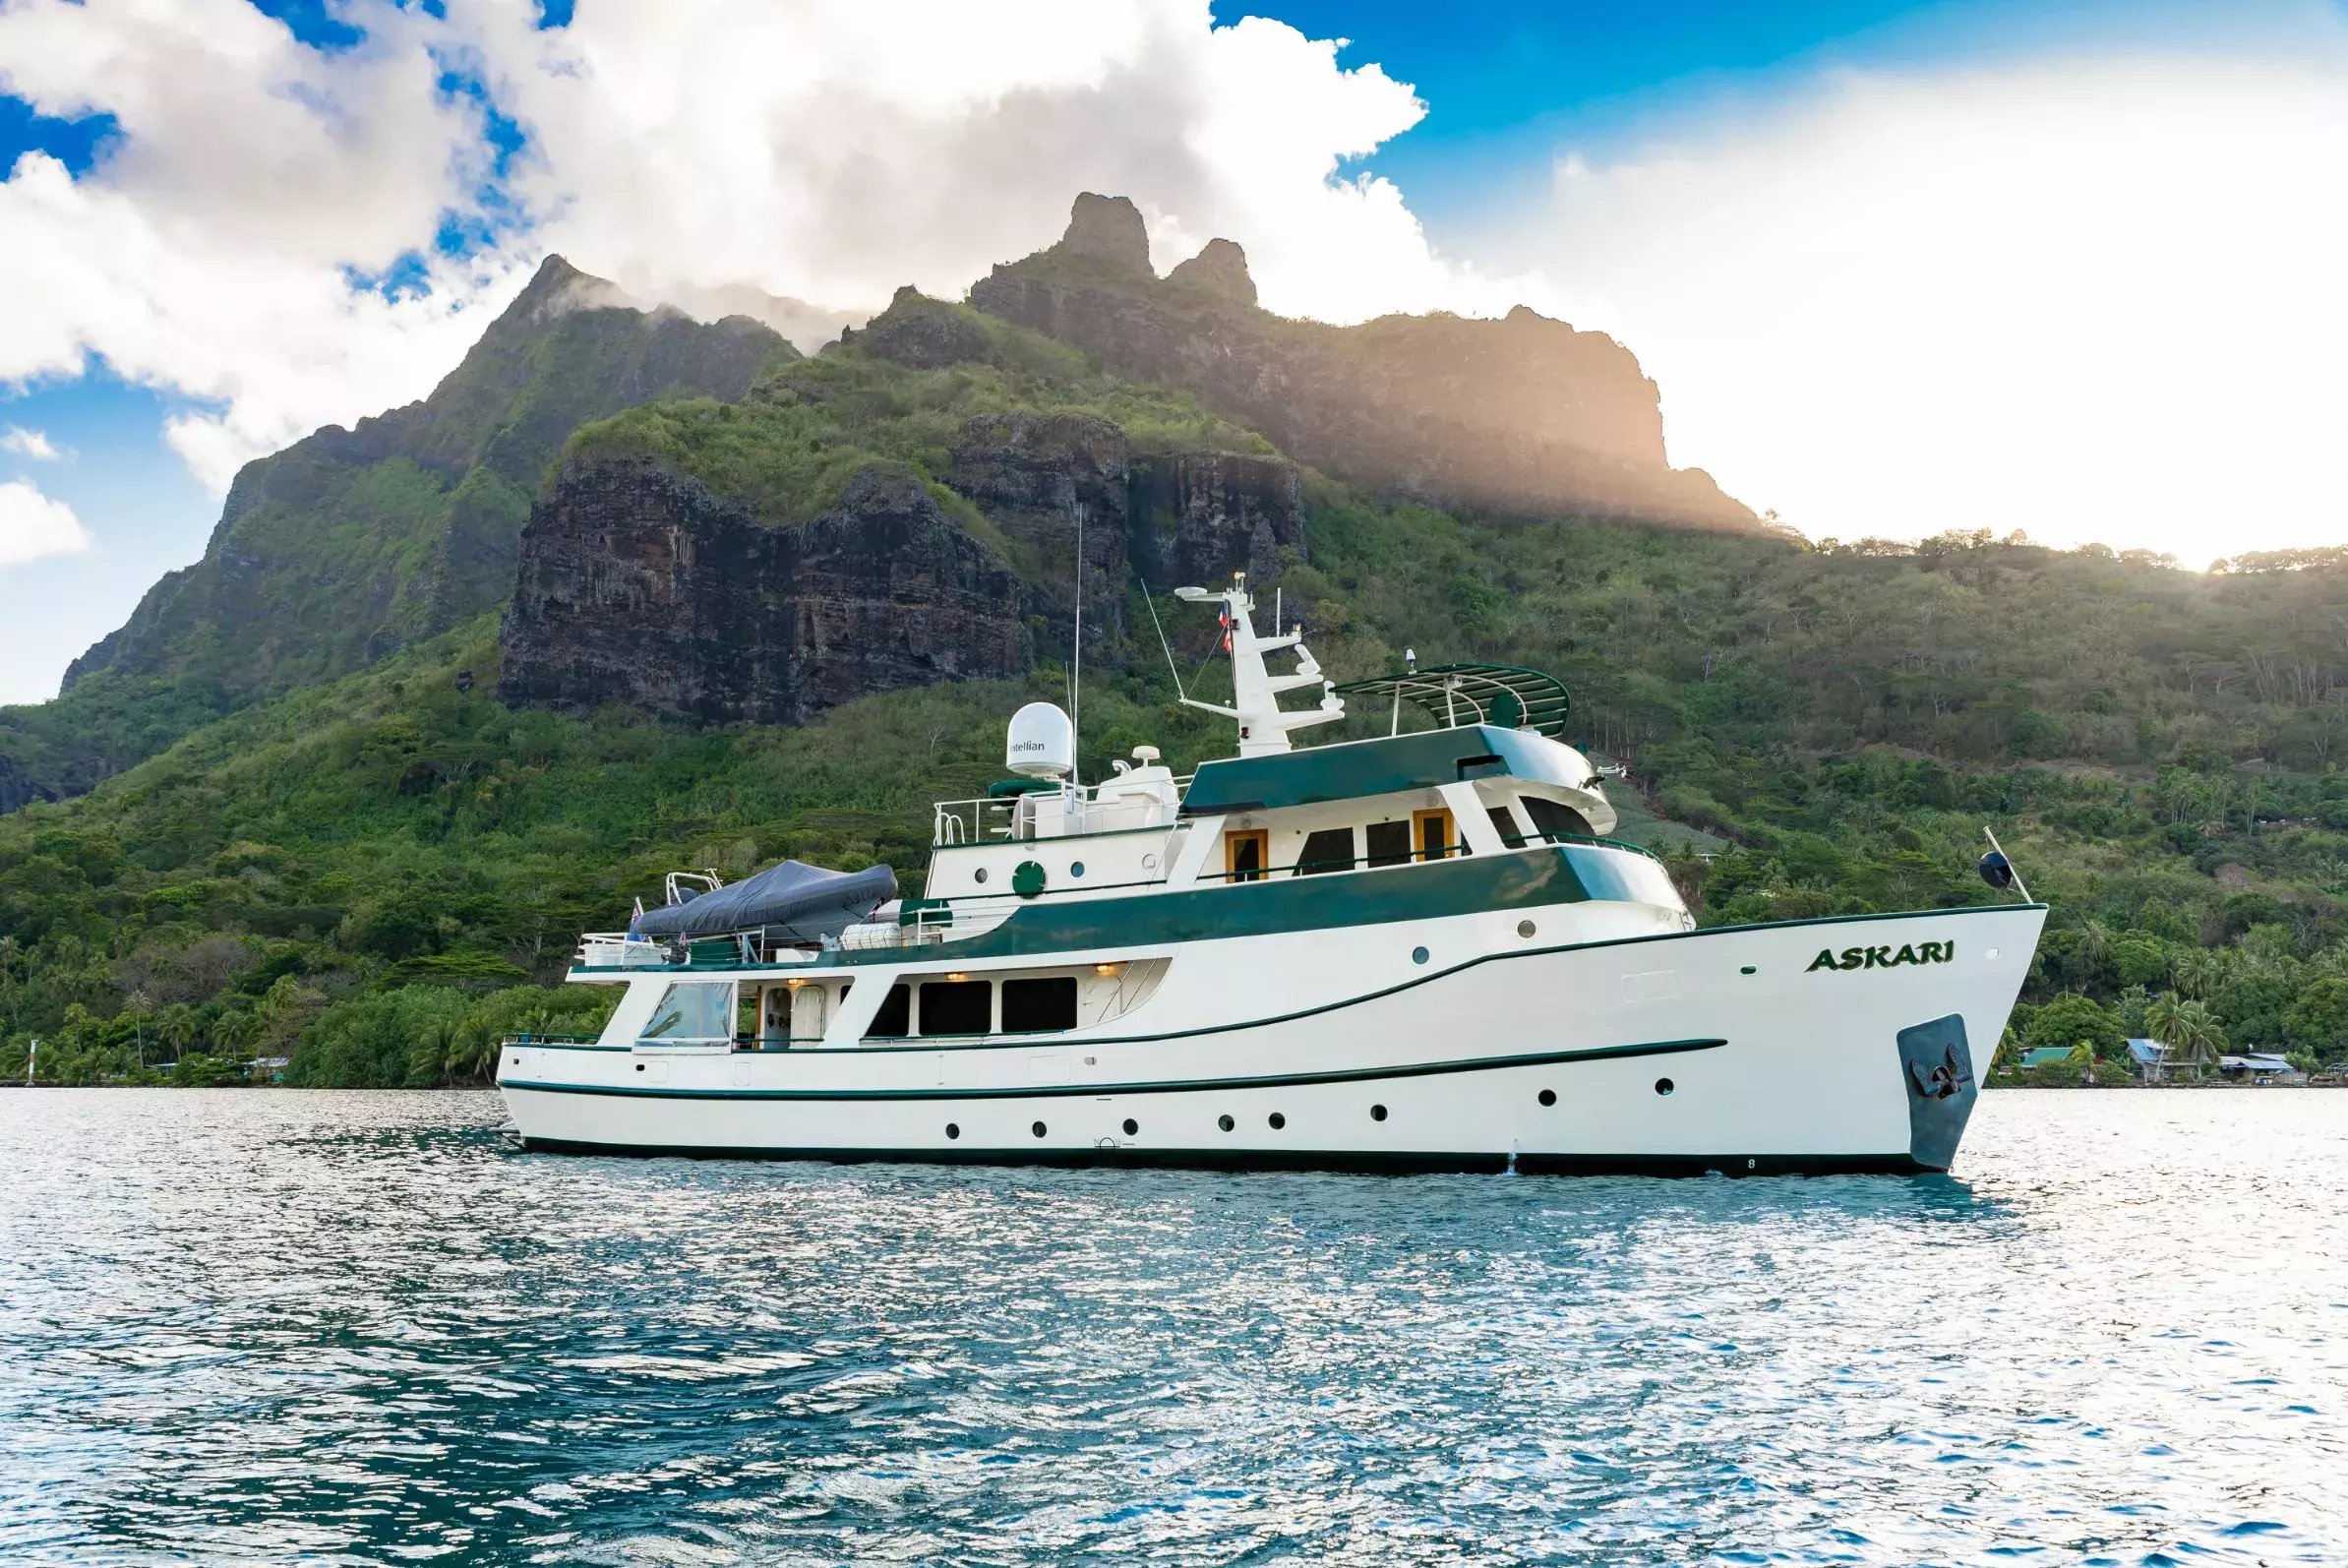 Askari by Sermons - Top rates for a Charter of a private Motor Yacht in Fiji